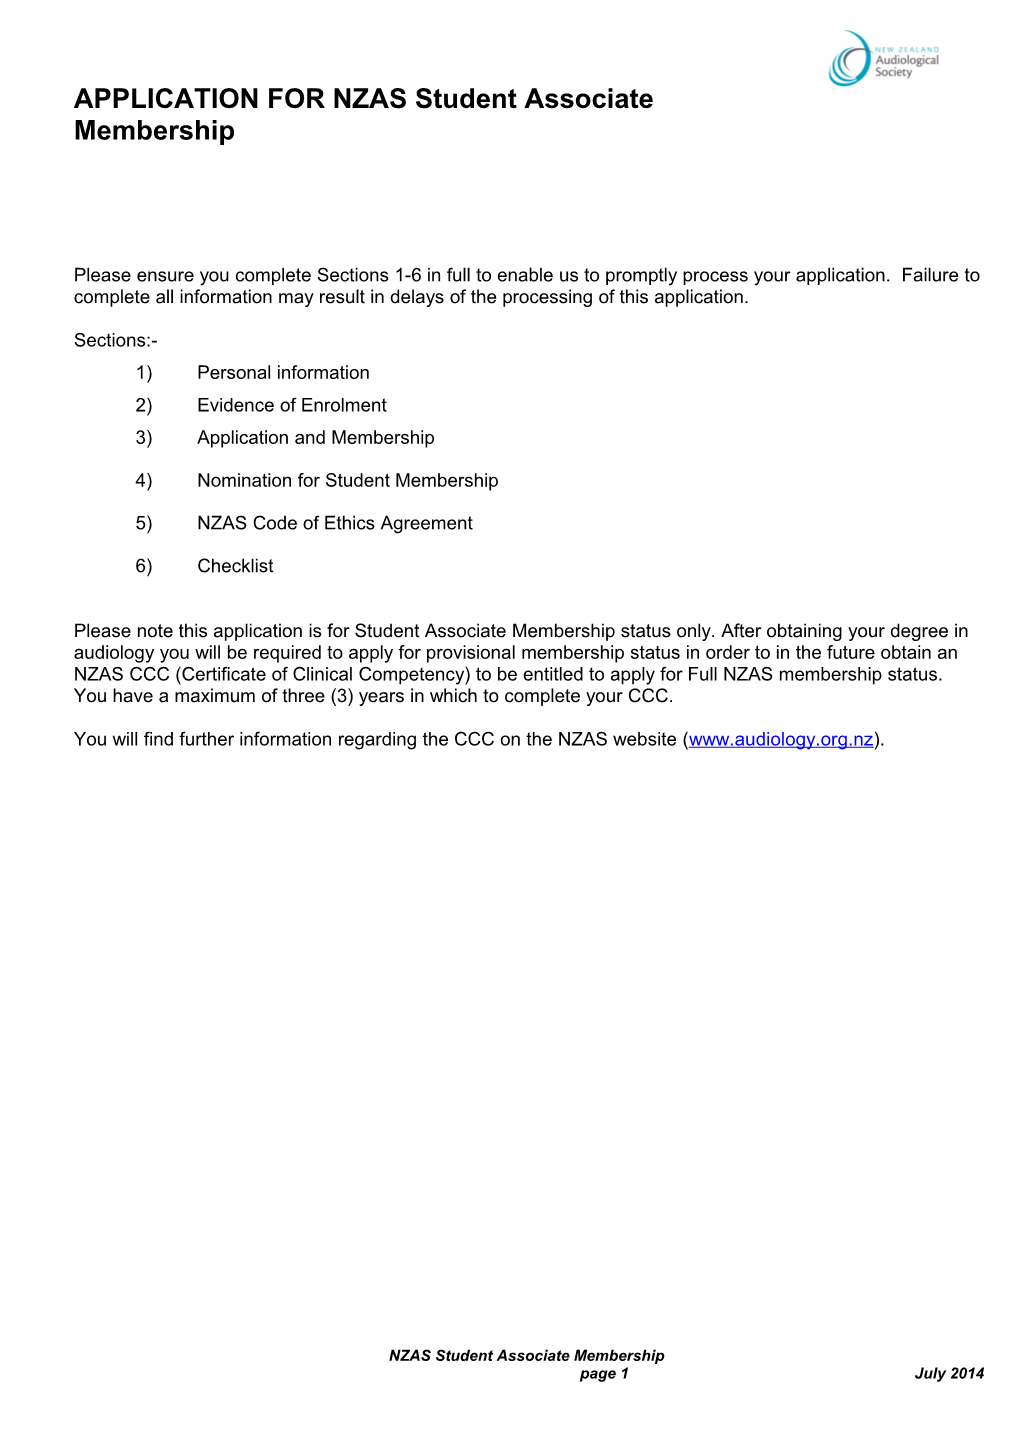 Application for Provisional Membership & Clinical Certification